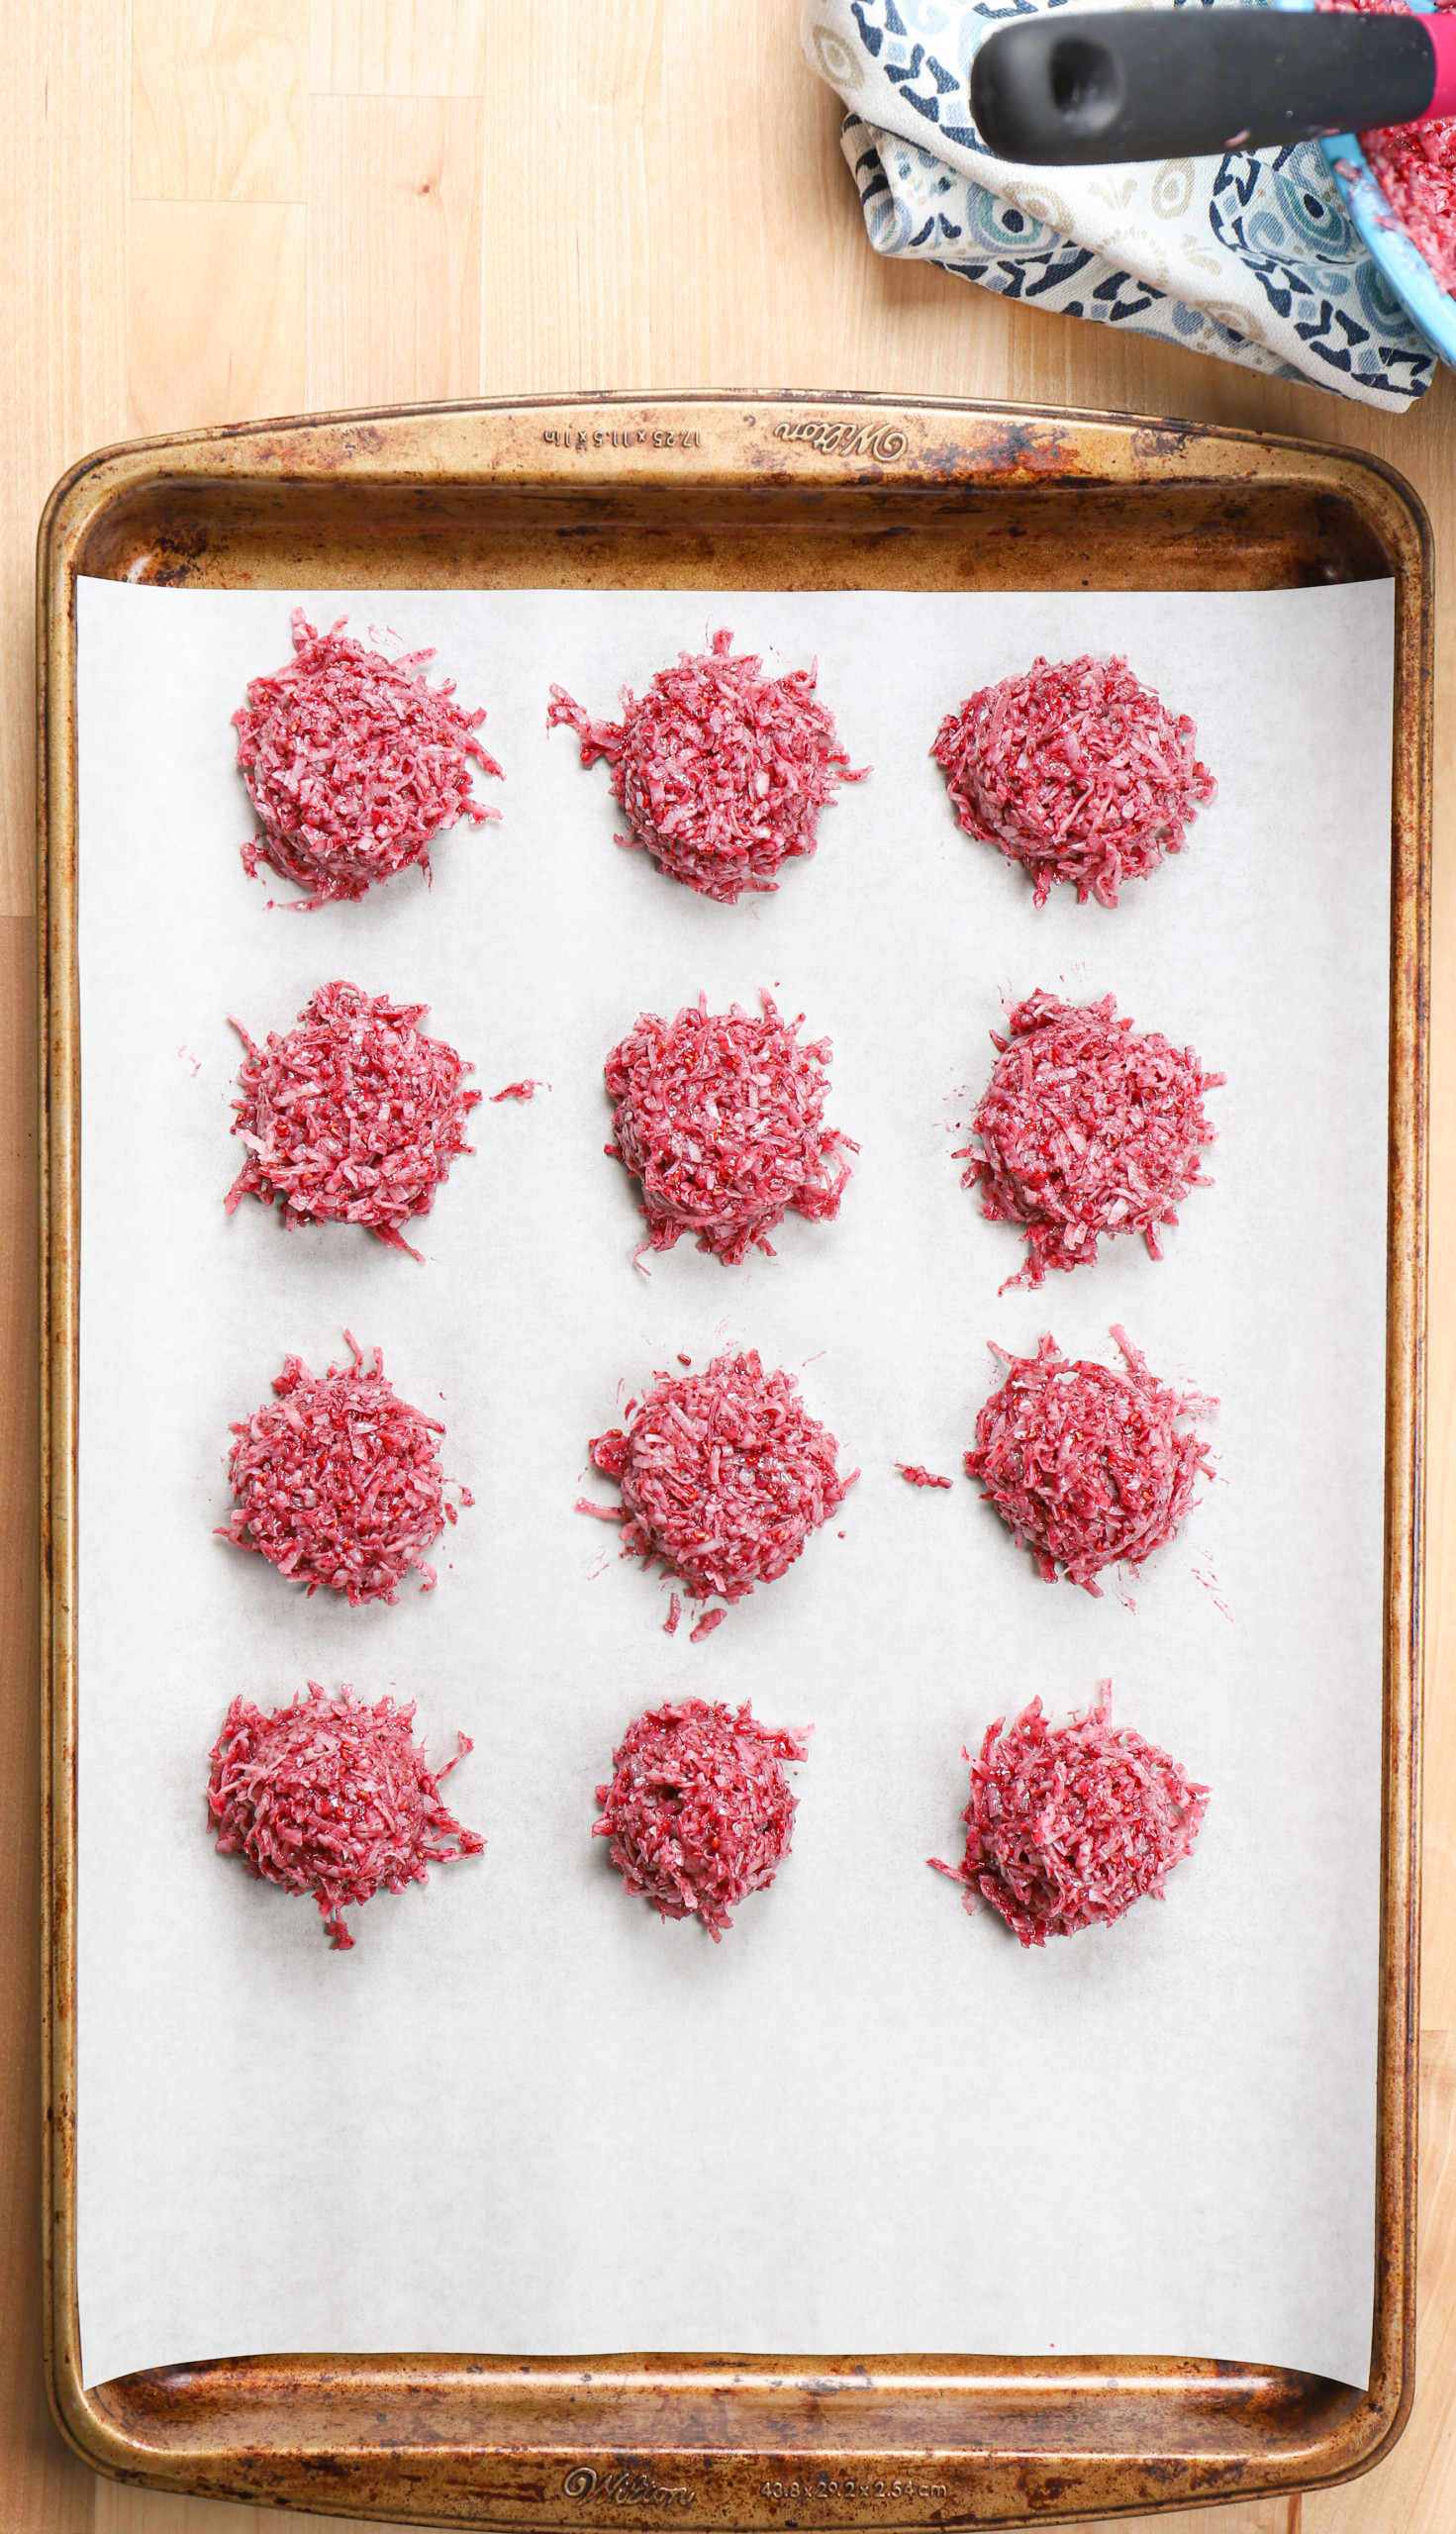 Overhead view of a batch of raspberry coconut macaroons right before baking.